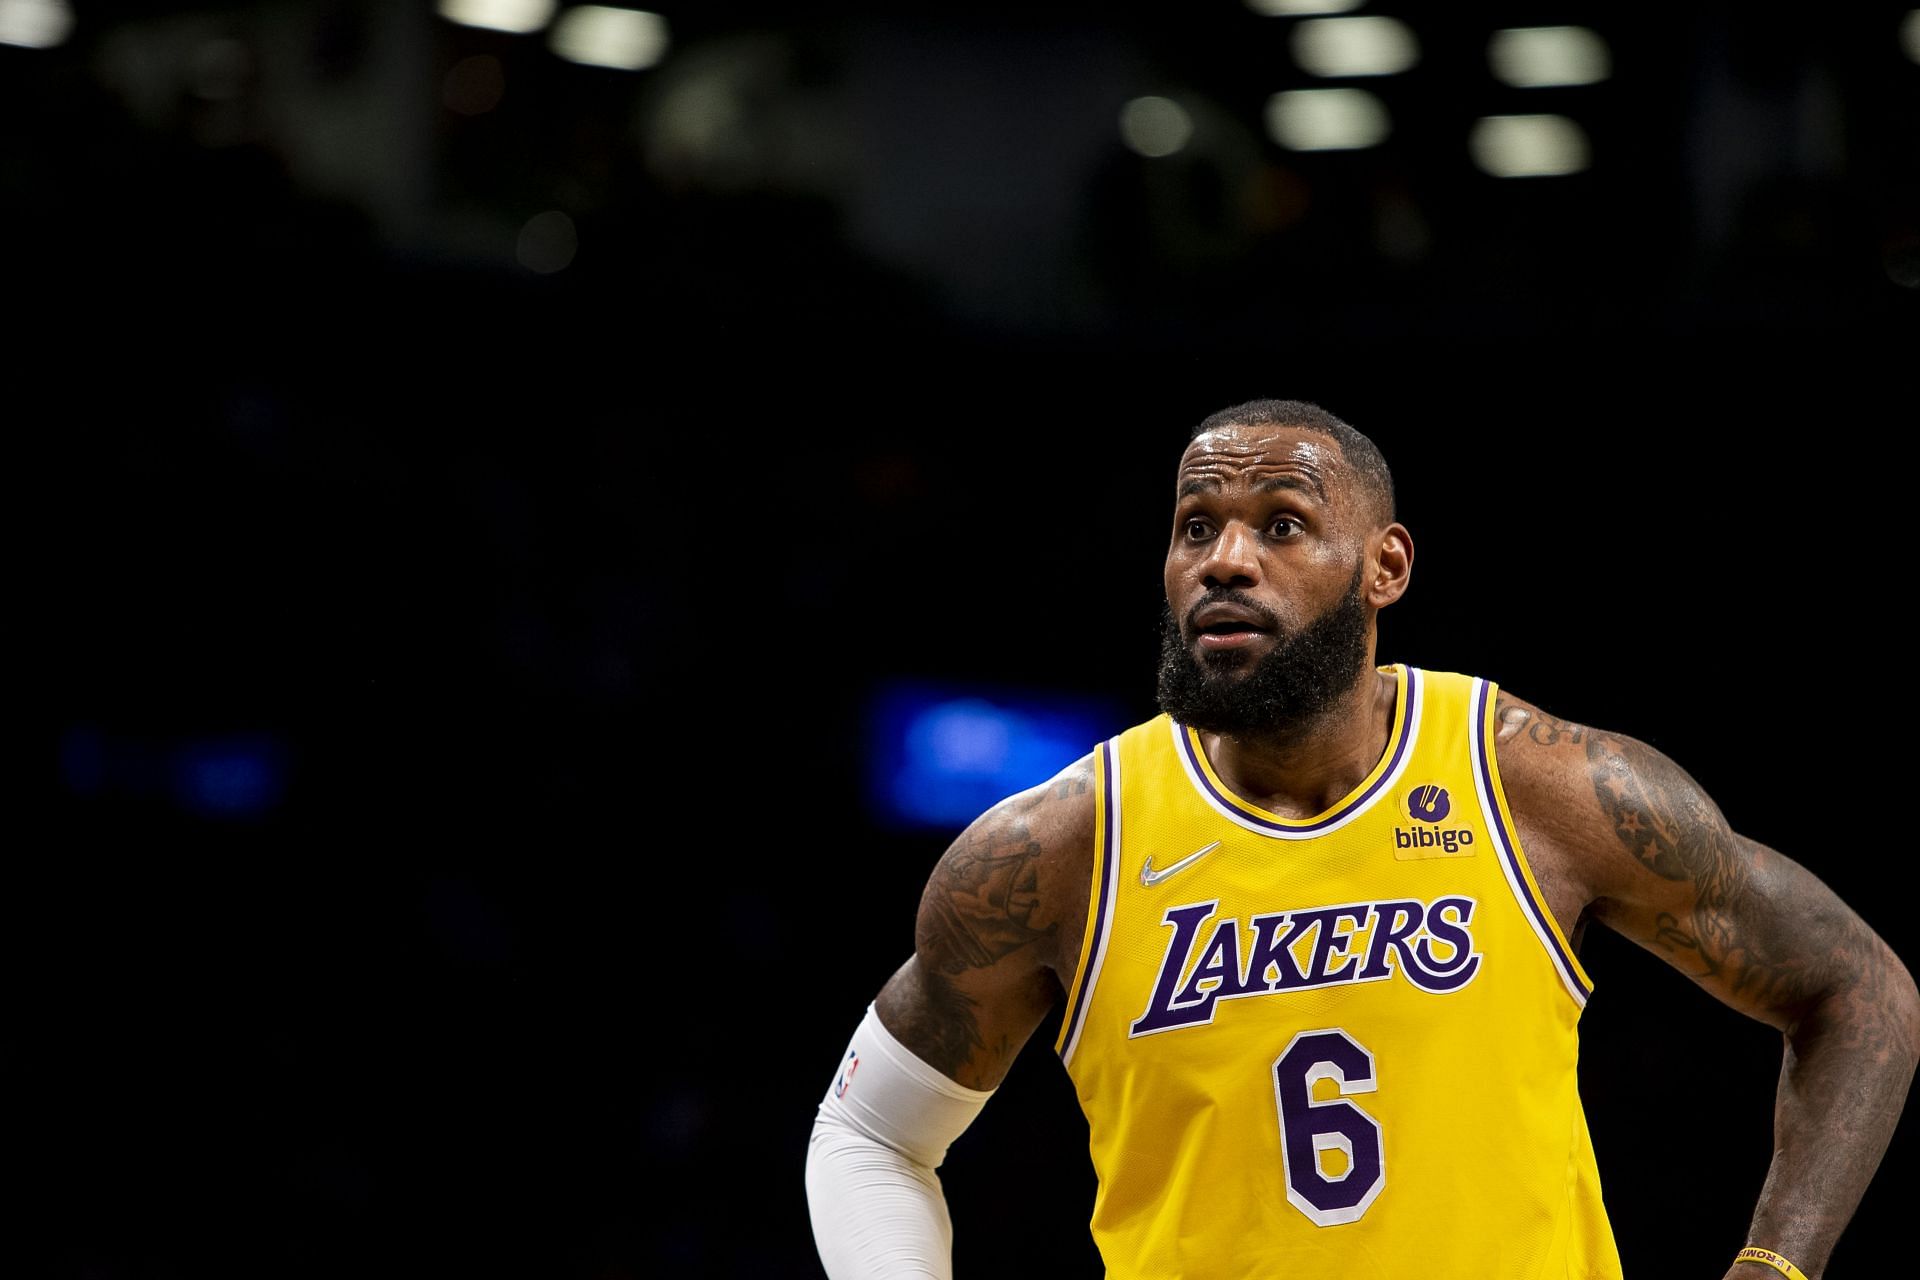 Los Angeles Lakers listed LeBron James to be out against the 76ers due to a left knee soreness